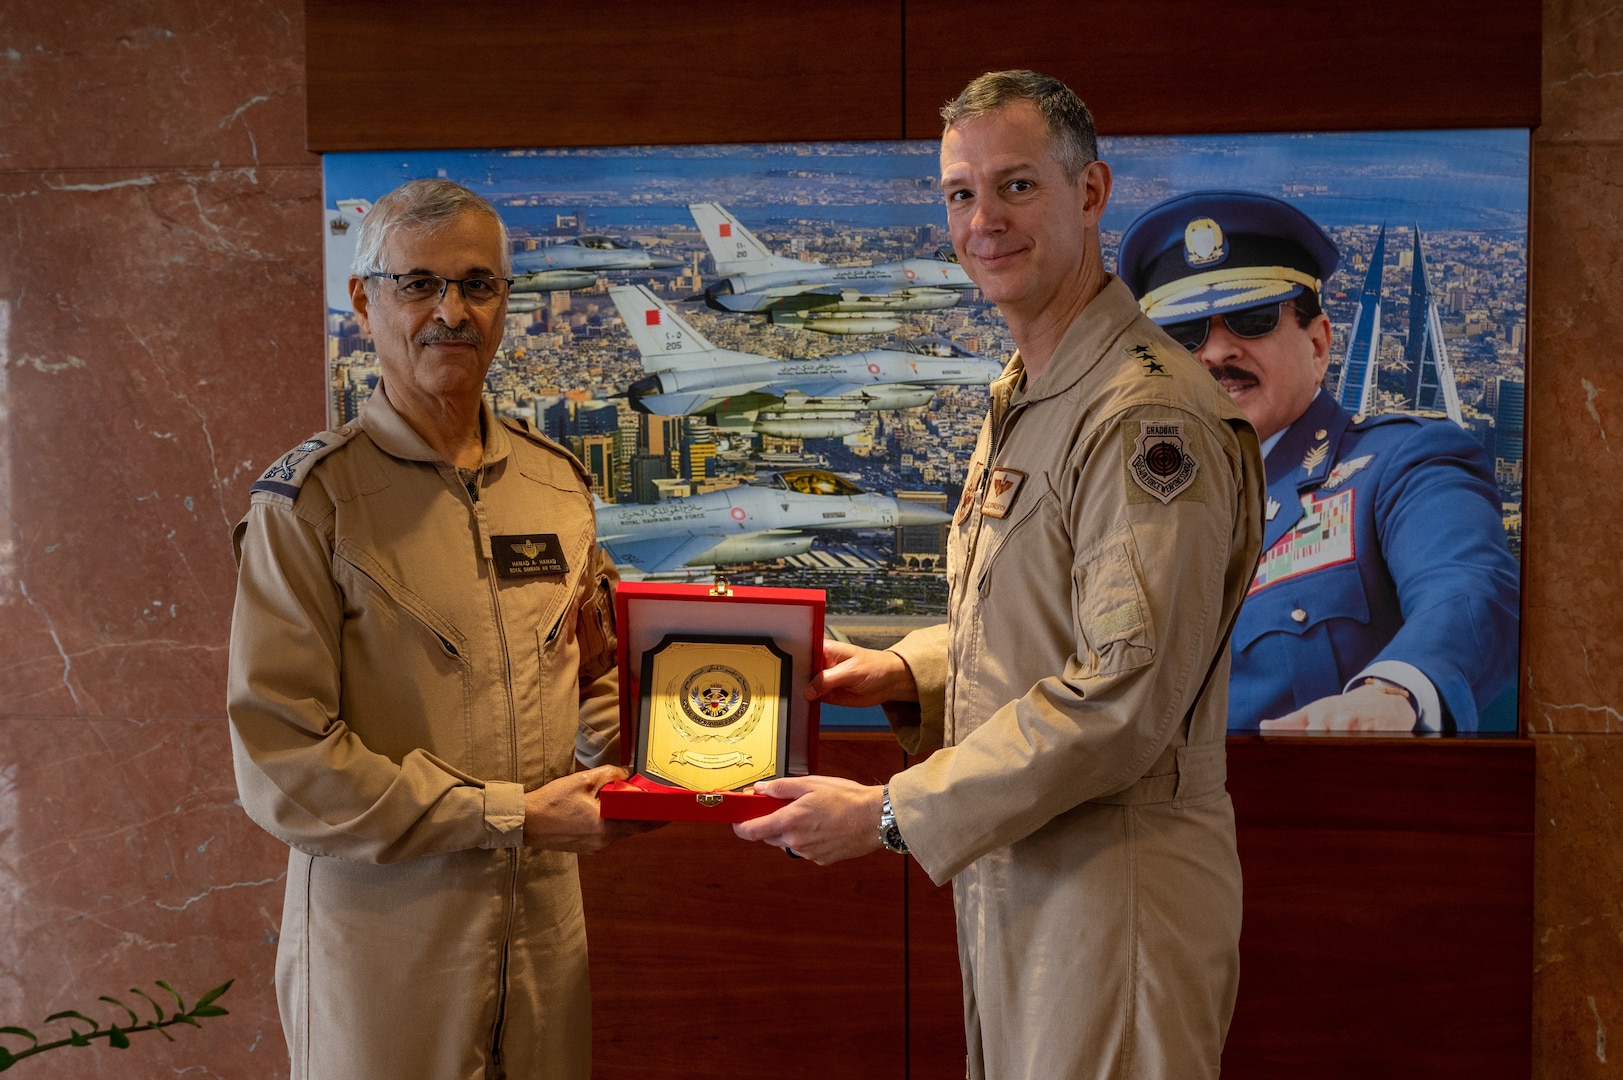 Lt. Gen. Alexus G. Grynkewich, Ninth Air Force (Air Forces Central) commander (right), receives a gift from Maj. Gen. Hamad bin Abdullah al Khalifah, Royal Bahraini Air Force commander, at a military facility in Bahrain, Sep. 5 2022. During his visit, Grynkewich met with Bahraini military and embassy leaders to better integrate military operations, strengthen resolute partnerships and ensure security within the U.S. Central Command area of responsibility (US. Air Force photo by Senior Airman Dominic Tyler)